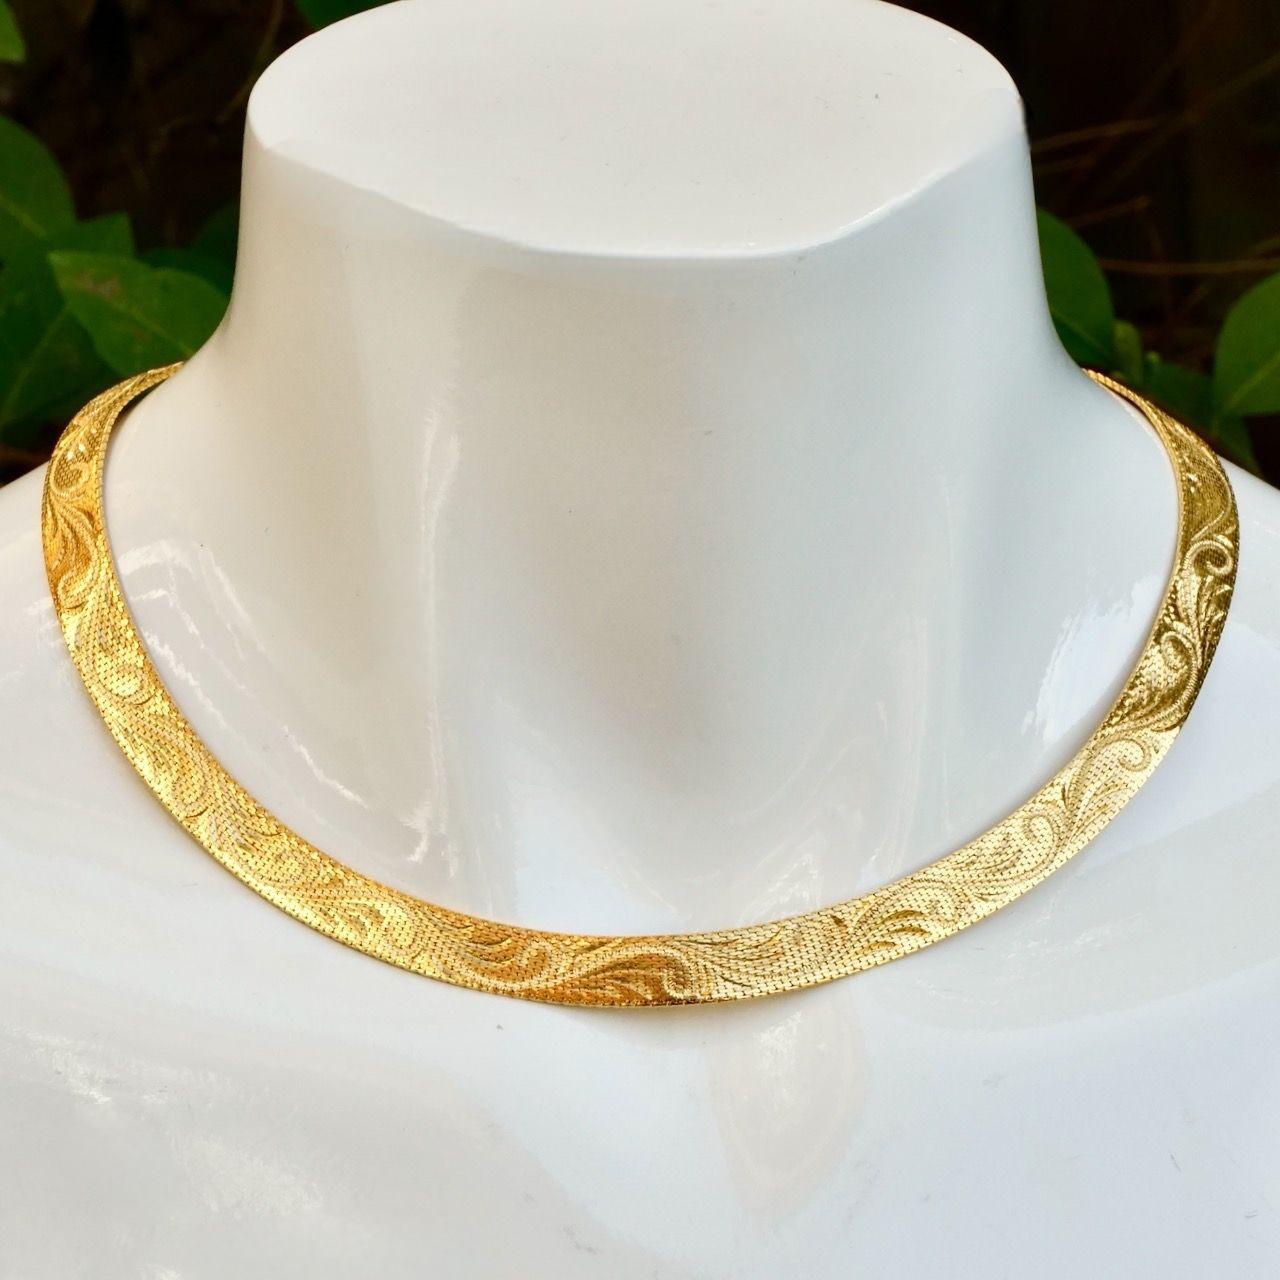 Gold Plated Swirl Design Egyptian Revival Mesh Collar Necklace circa 1980s For Sale 1